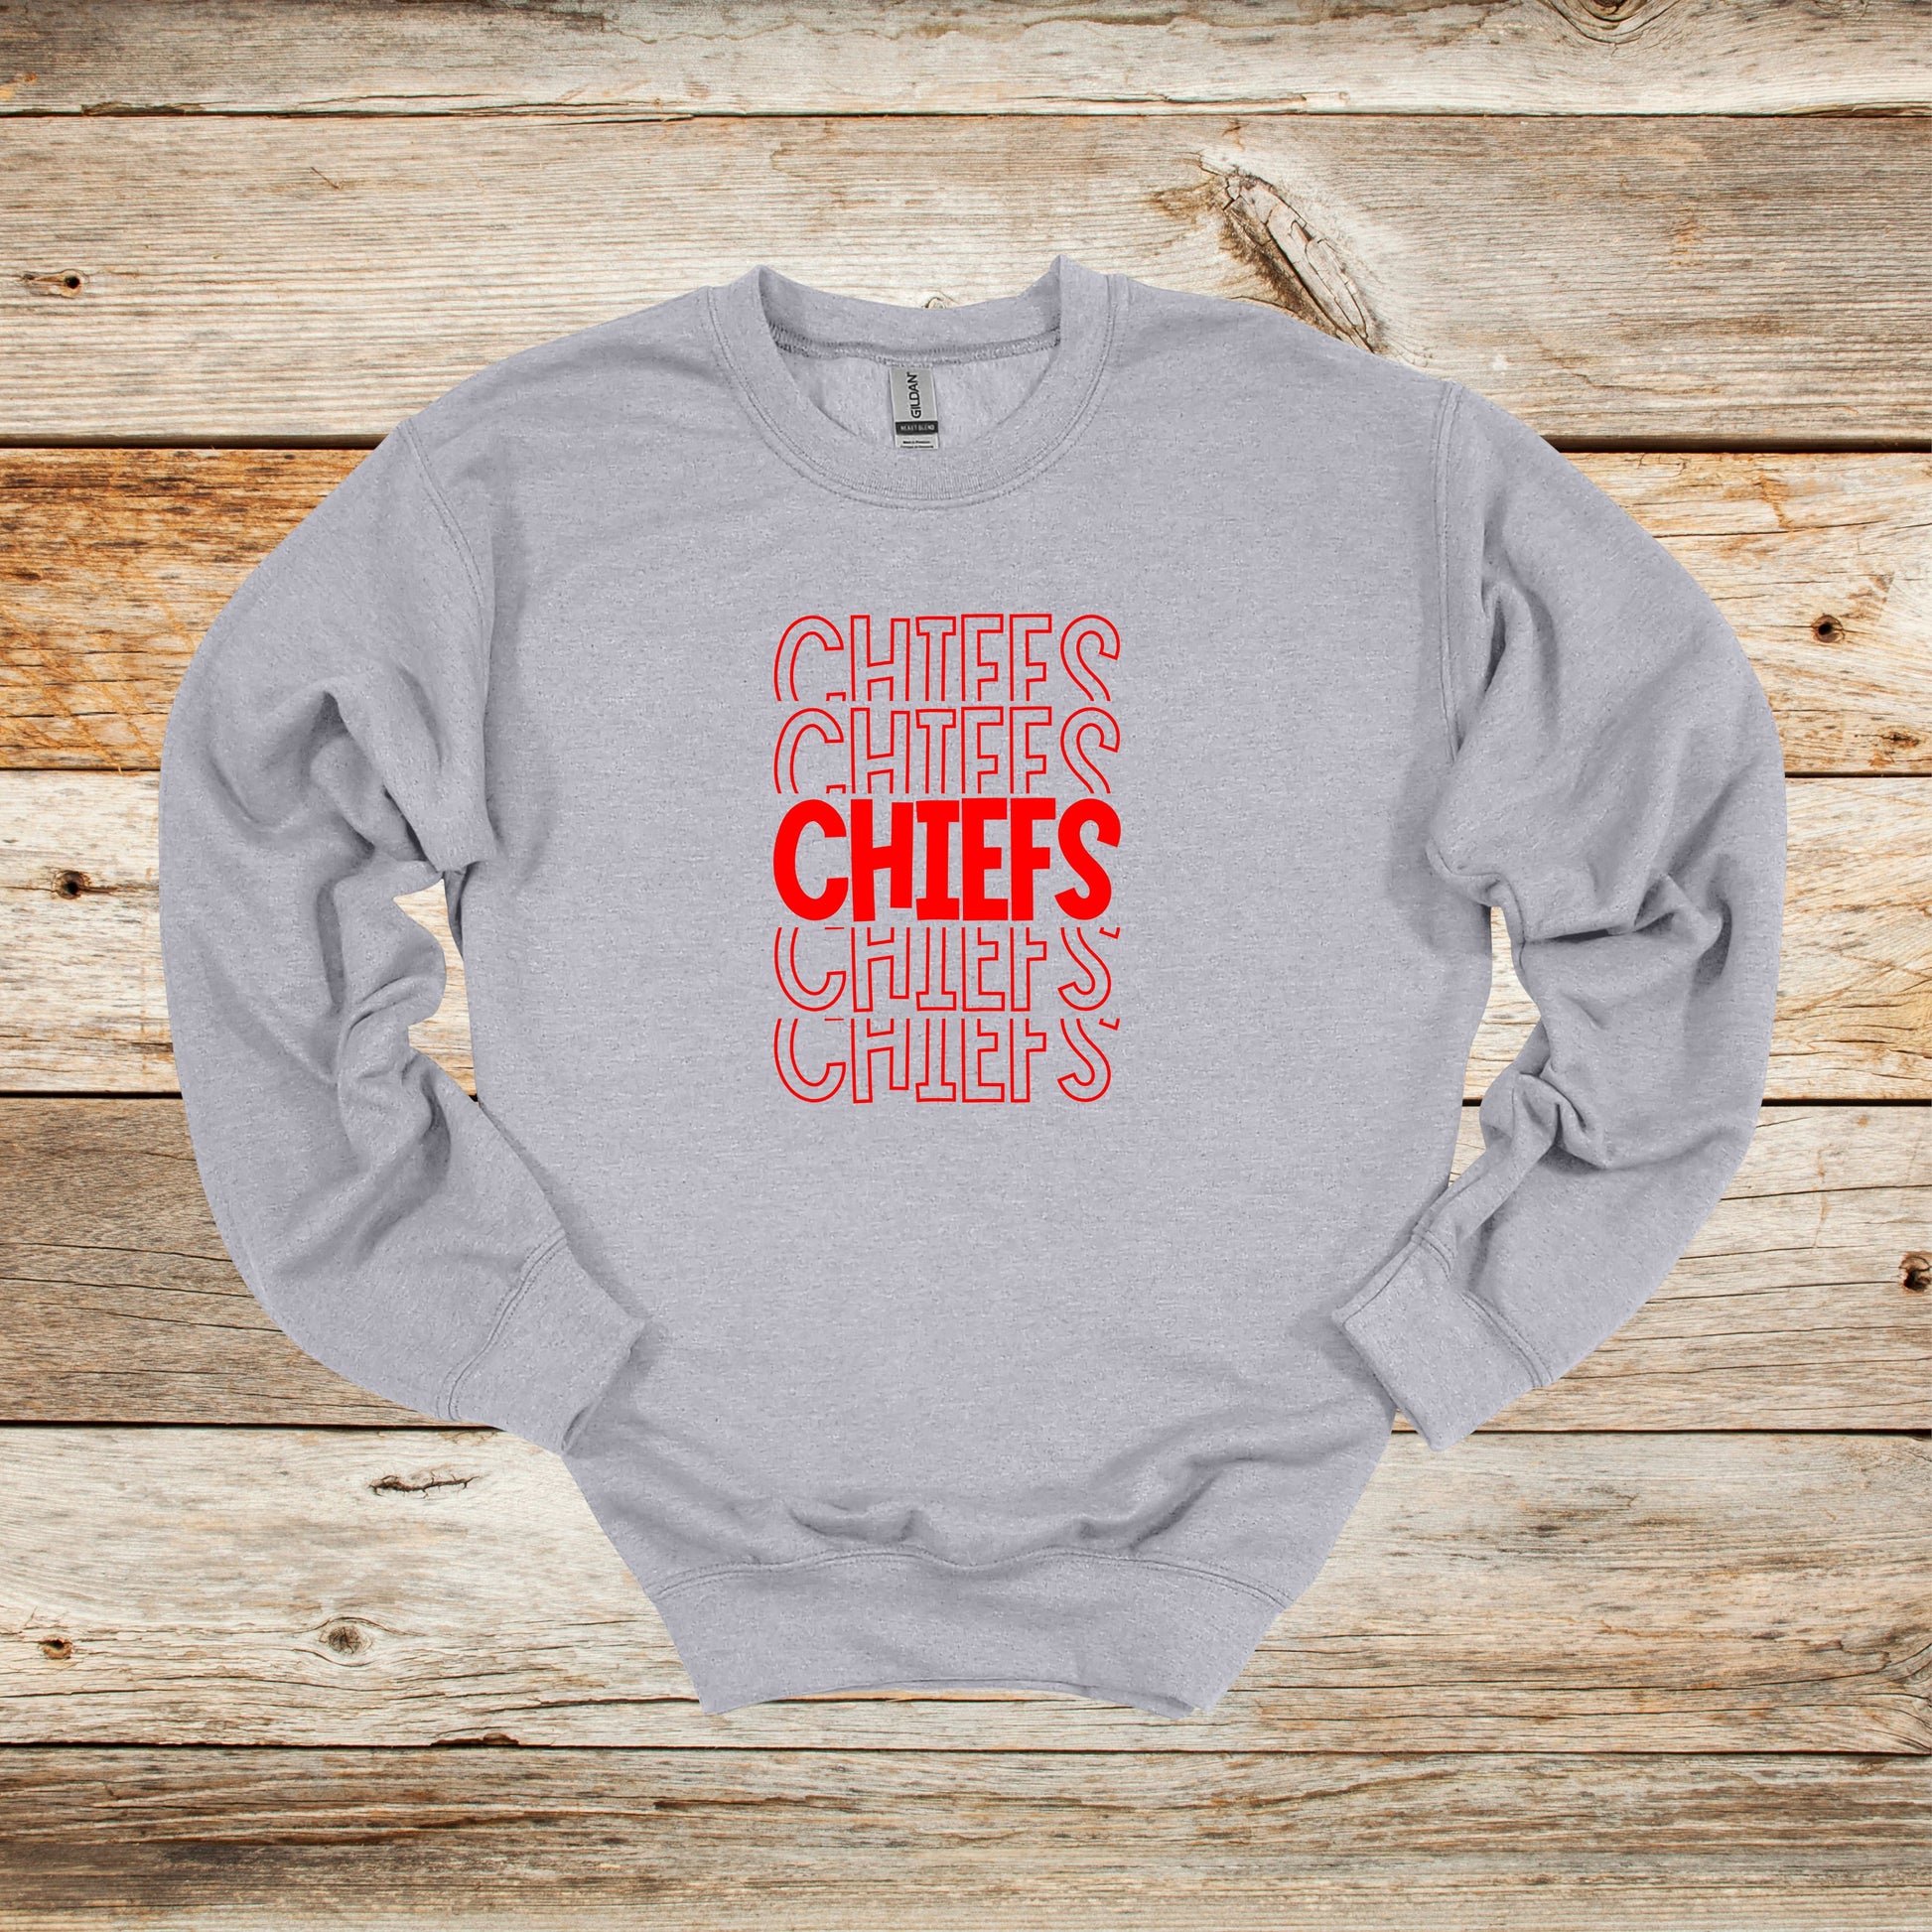 Football Crewneck and Hooded Sweatshirt - Chiefs Football - Chiefs - Adult and Children's Tee Shirts - Sports Hooded Sweatshirt Graphic Avenue Crewneck Sweatshirt Sport Grey Adult Small